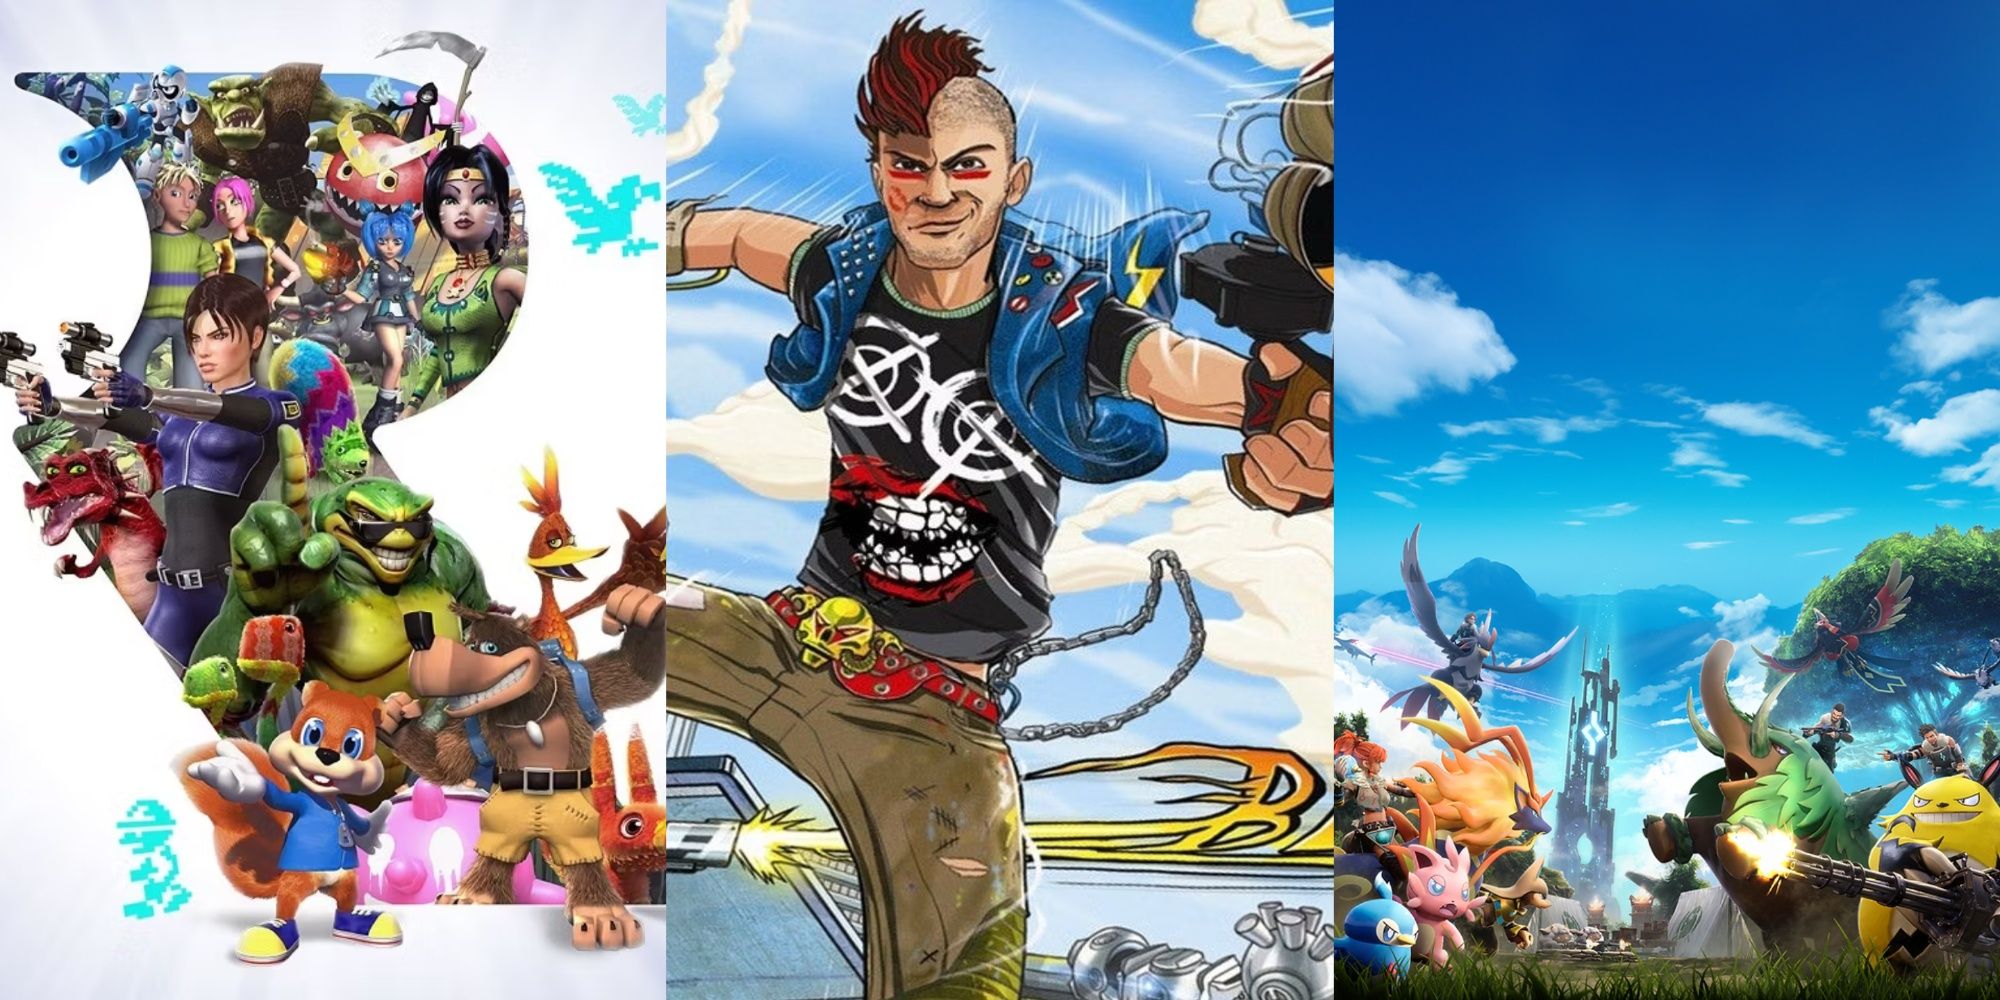 Box arts to Rare Replay, Sunset Overdrive, and Palworld